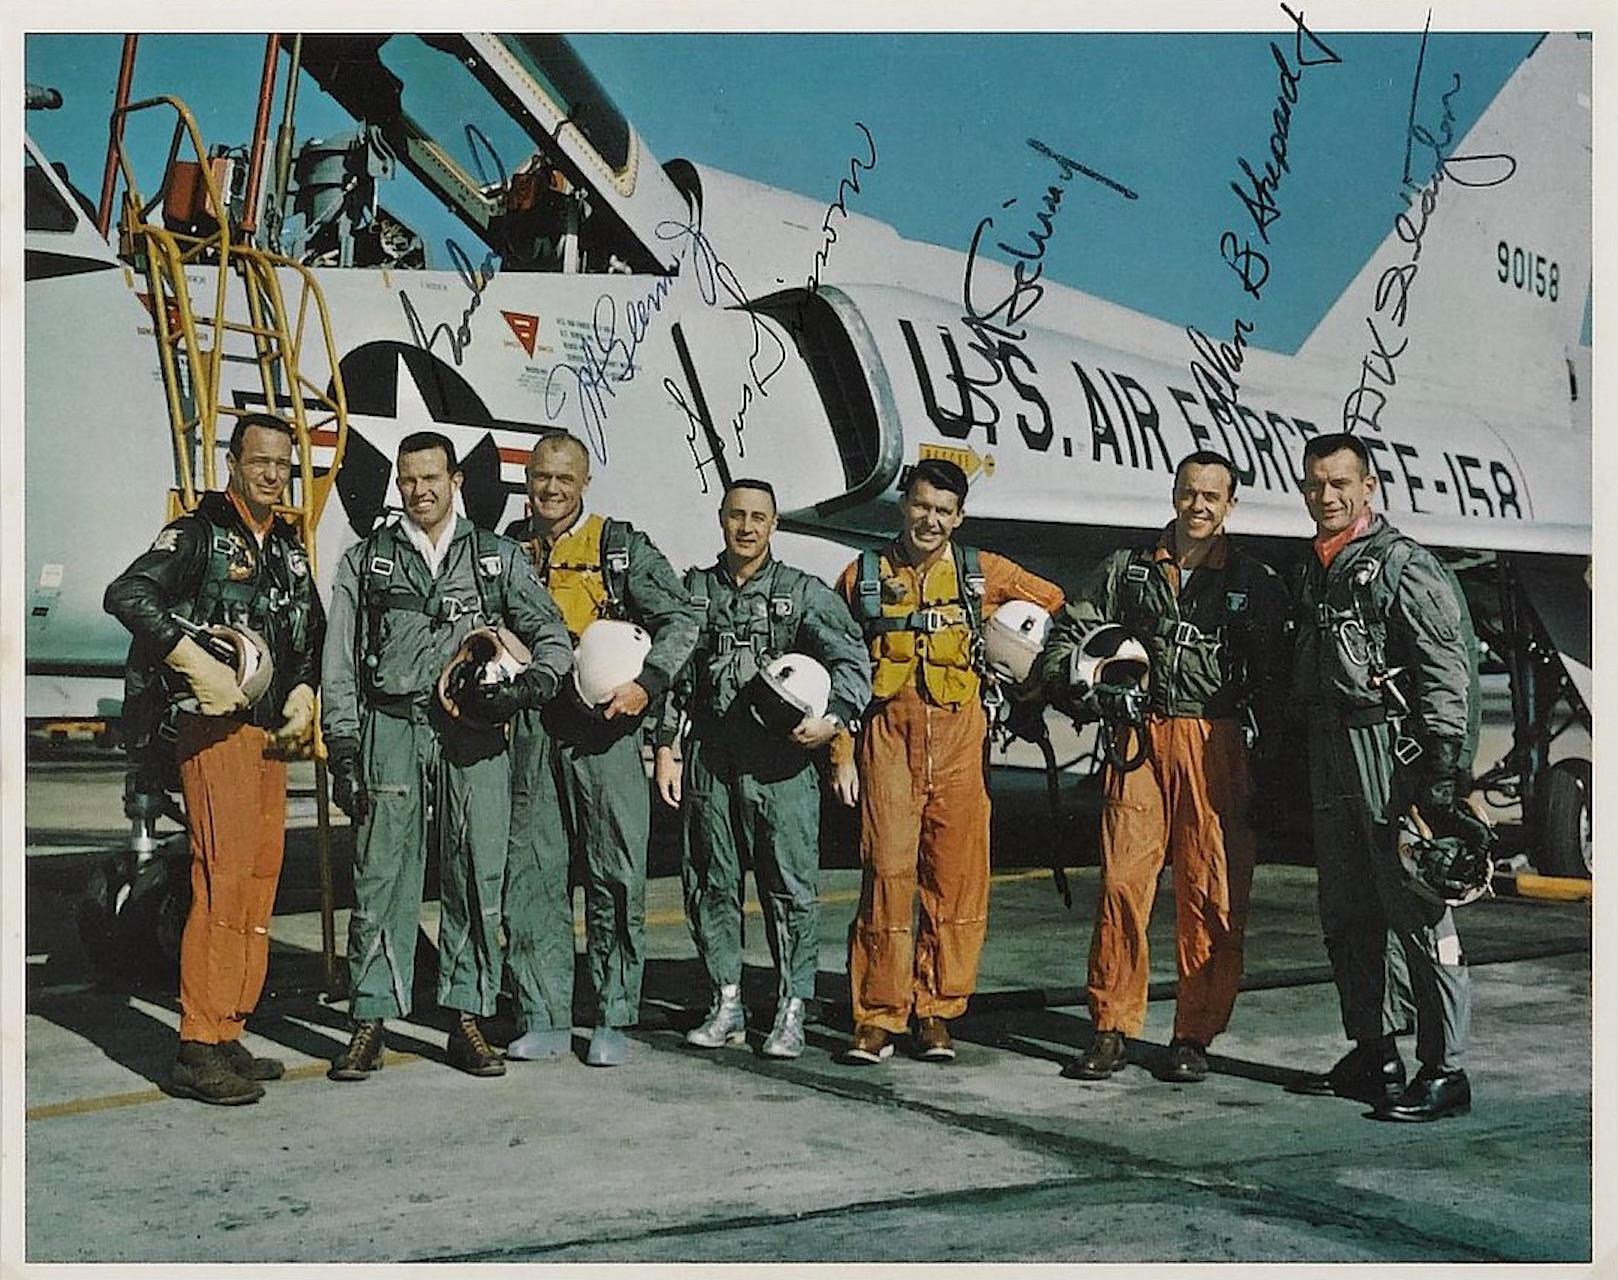 This collage features a NASA official color lithograph for Mercury 7 with autographs of six of the crew members: Gordon Cooper, J.H. Glenn Jr., Gus Grissom, W.M. Schirra Jr., Deke Slayton, and a secretarial signature of Alan B. Shepard. Just above